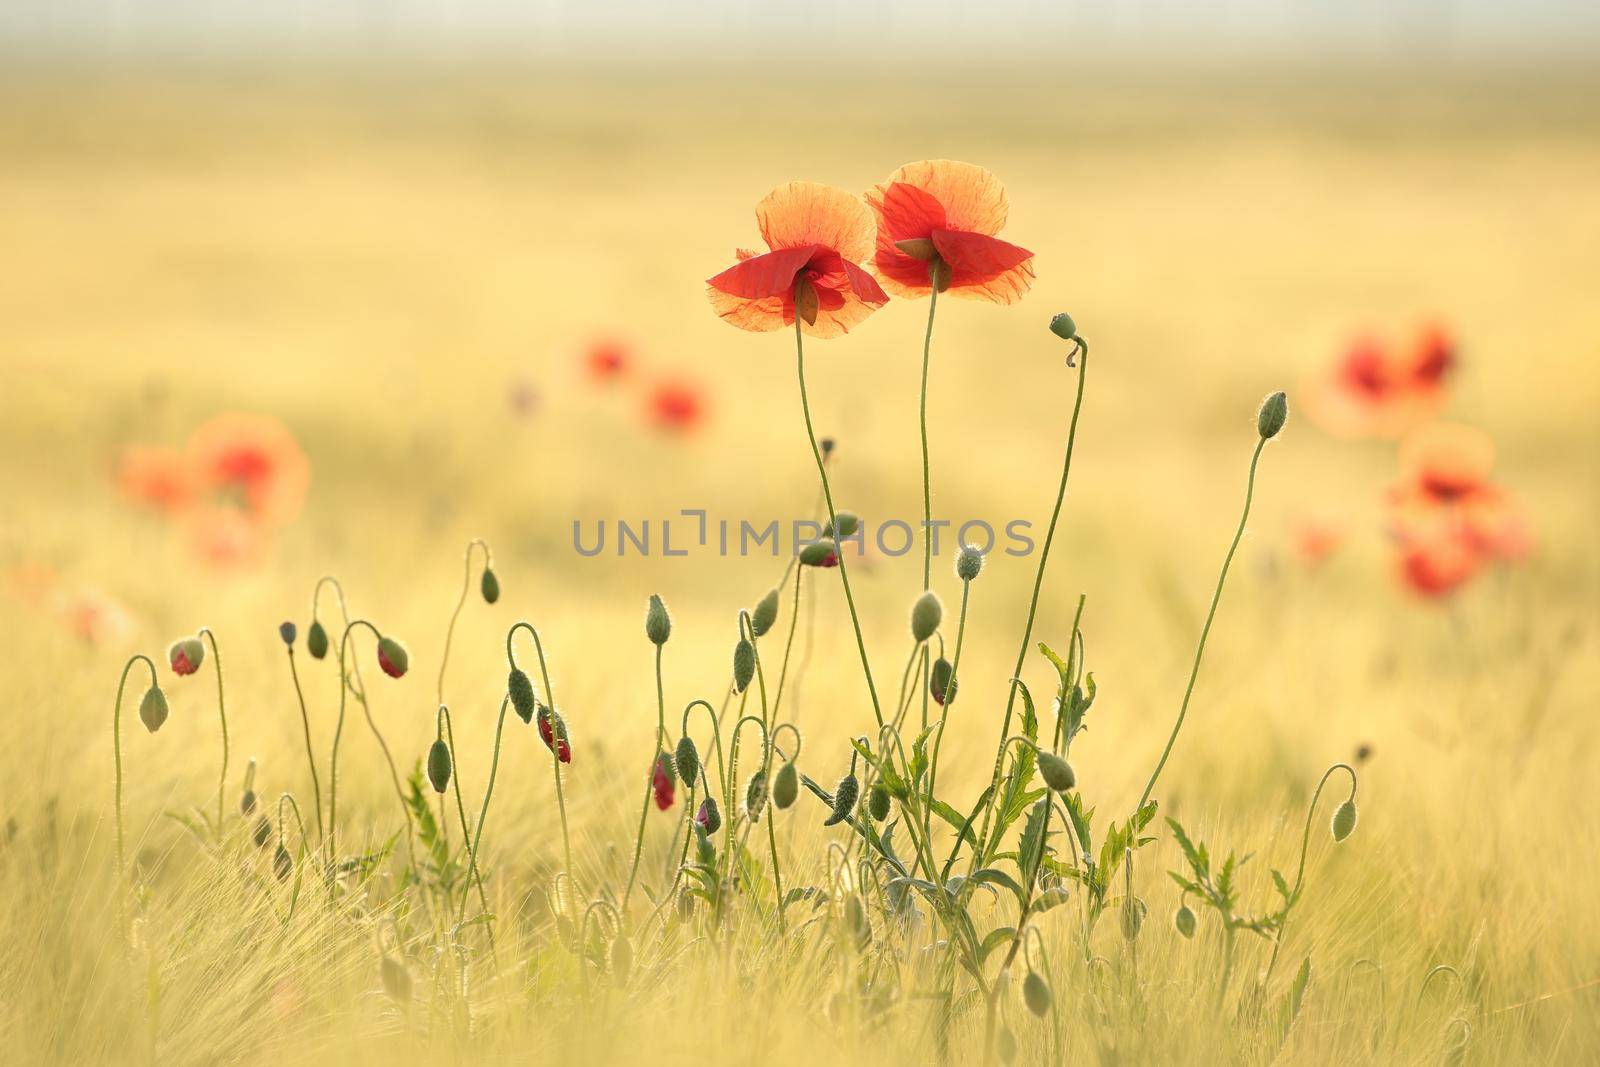 Poppies in the field at sunrise.